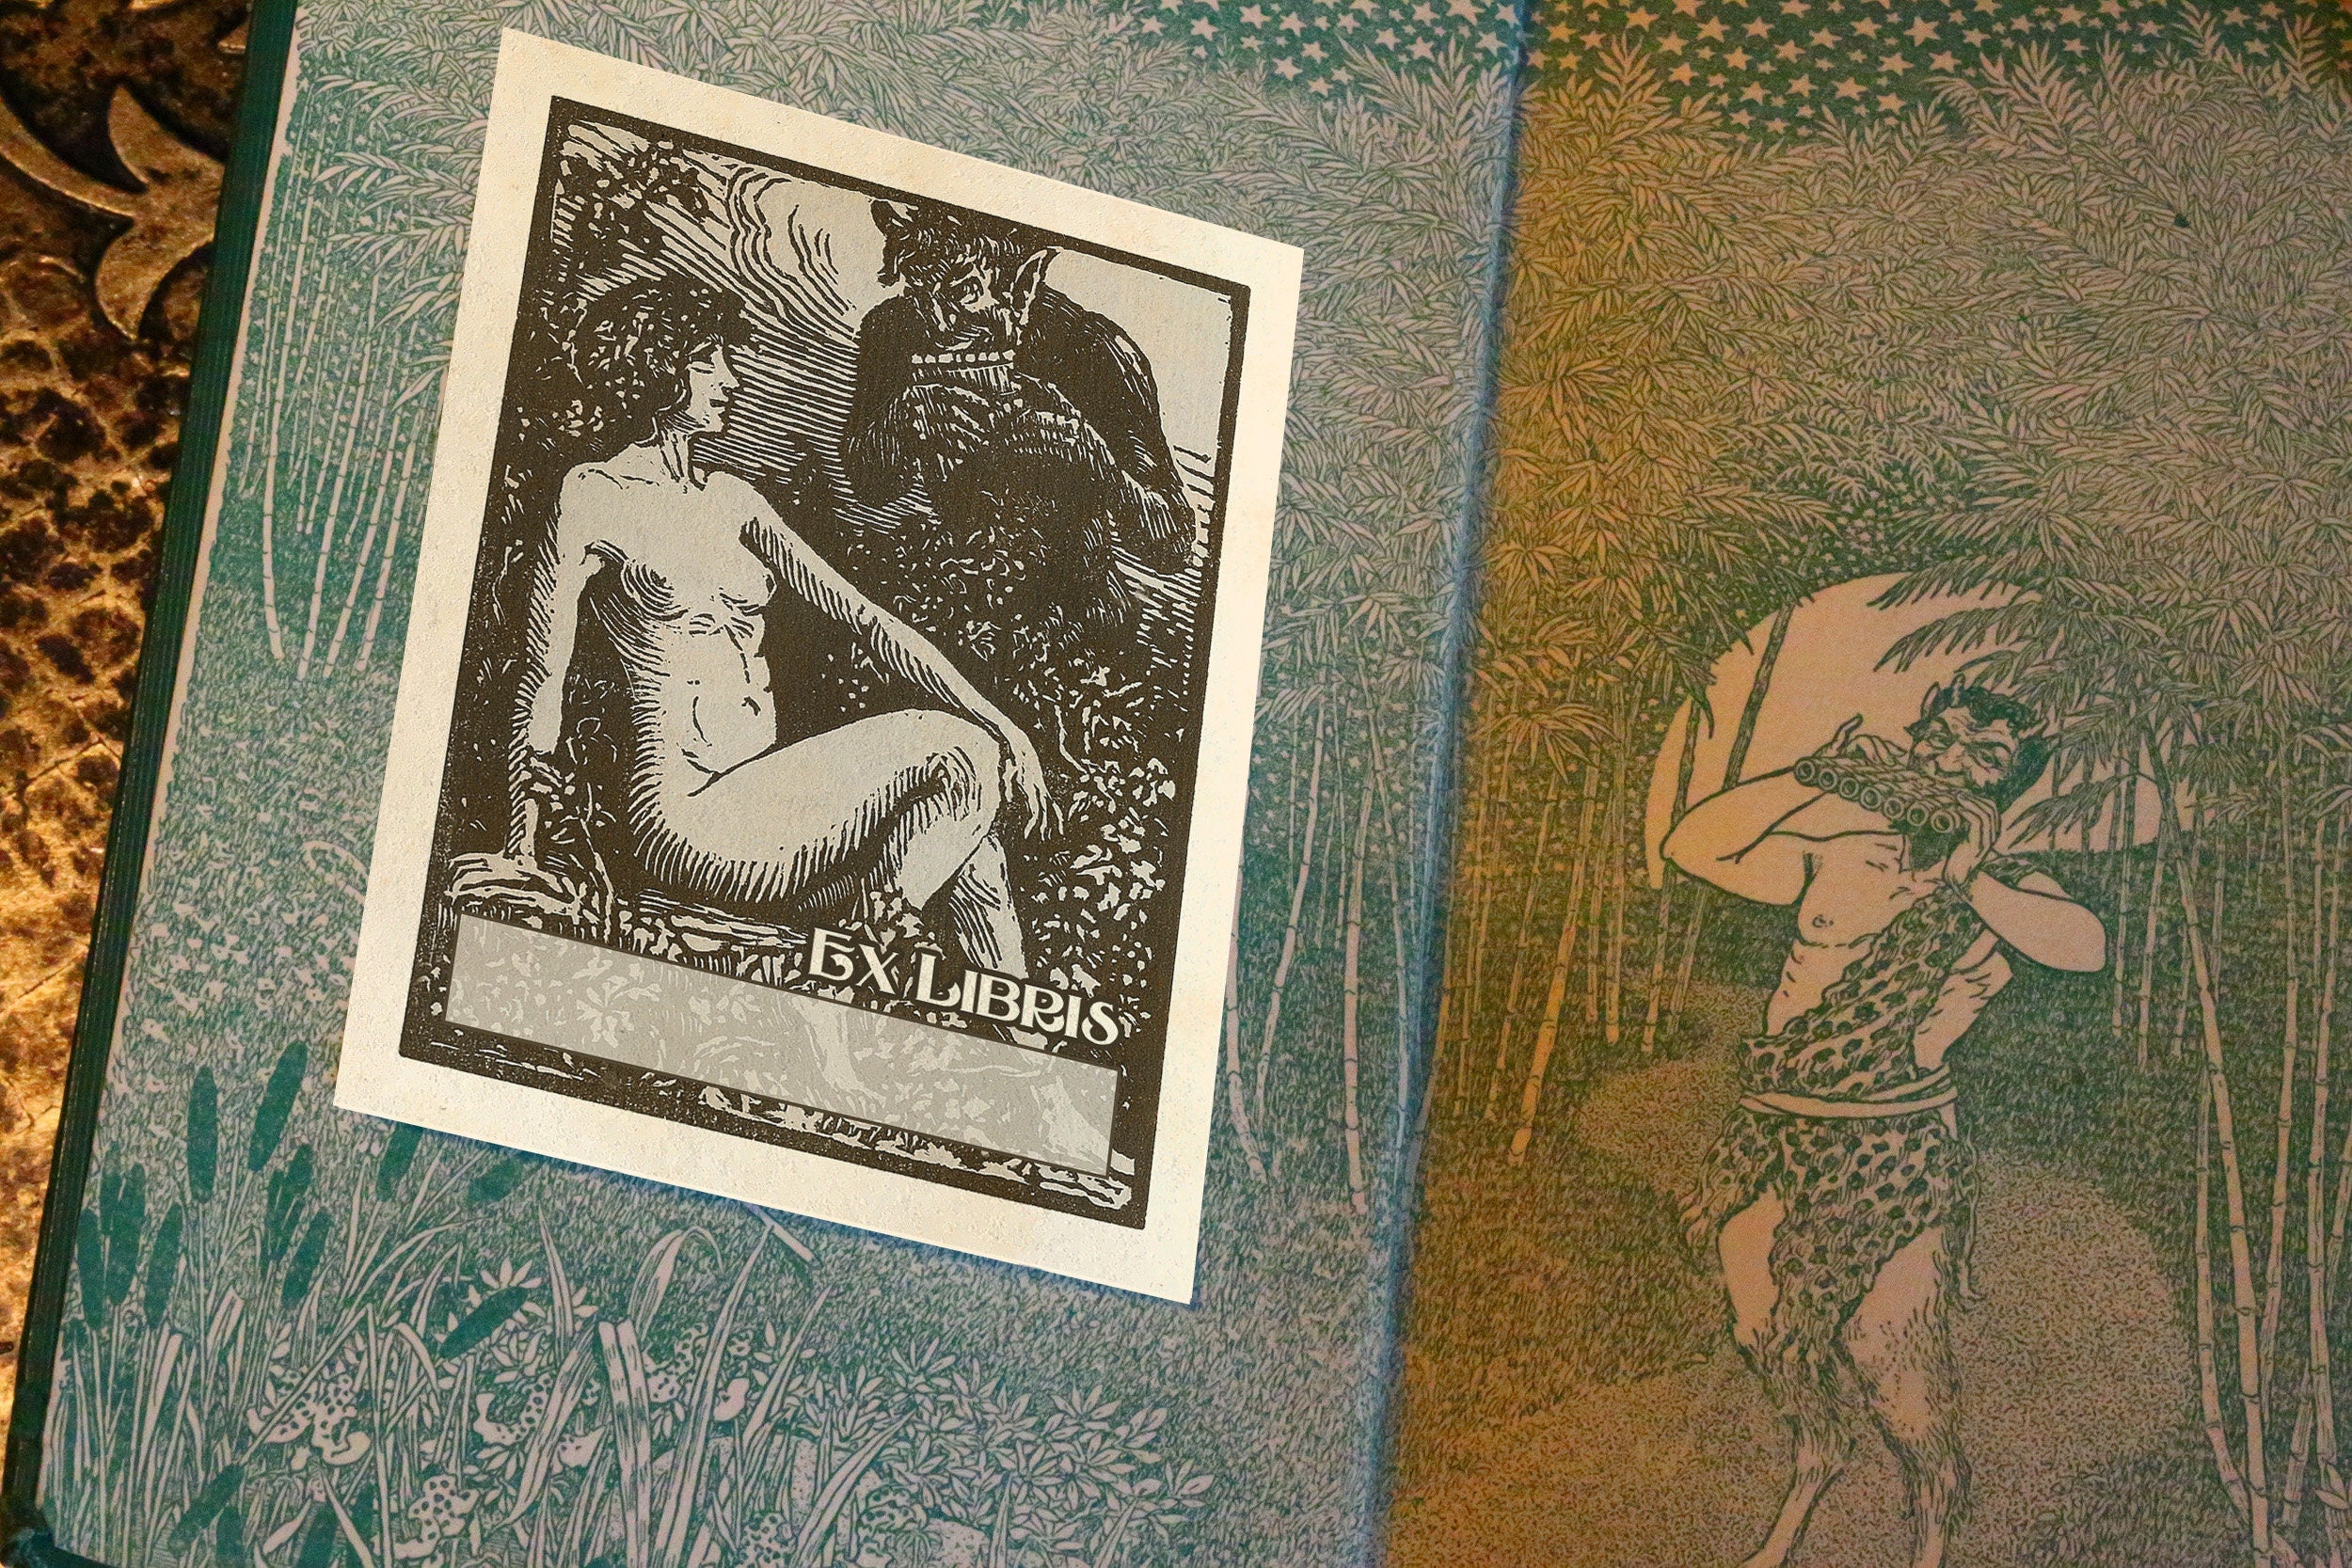 Bacchante and Satyr, Personalized Erotic Ex-Libris Bookplates, Crafted on Traditional Gummed Paper, 3in x 4in, Set of 30